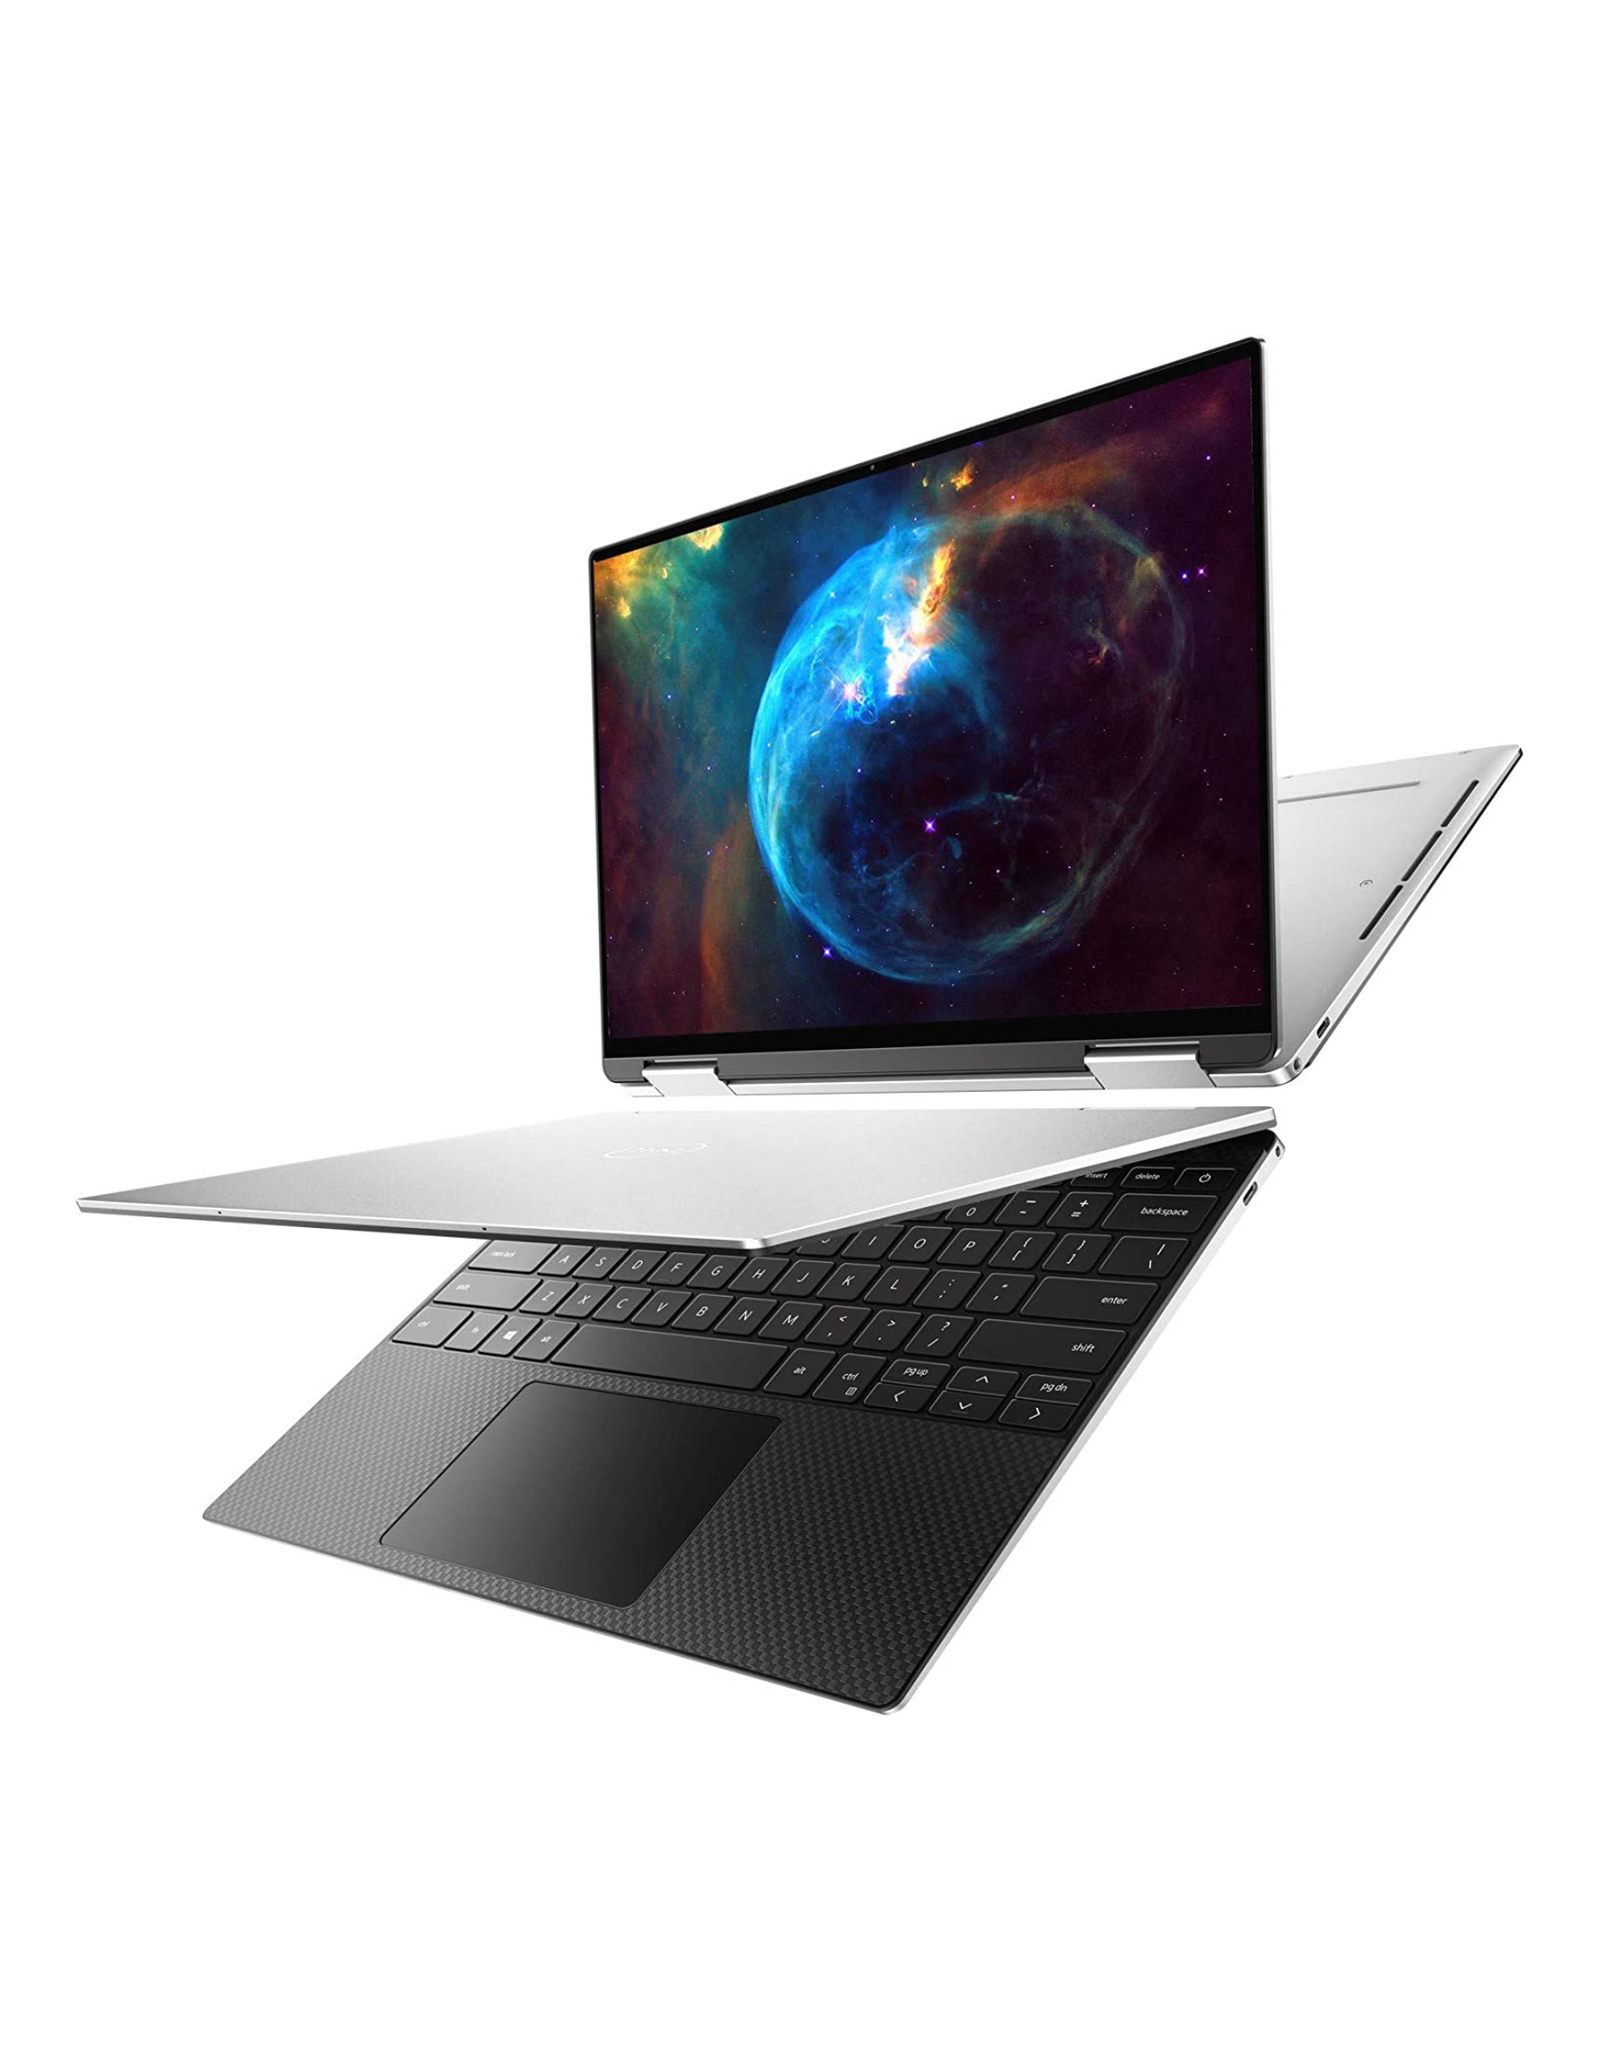 Dell XPS 13 7390 2-in-1 Convertible, 13.4 inch FHD+ Touch Laptop